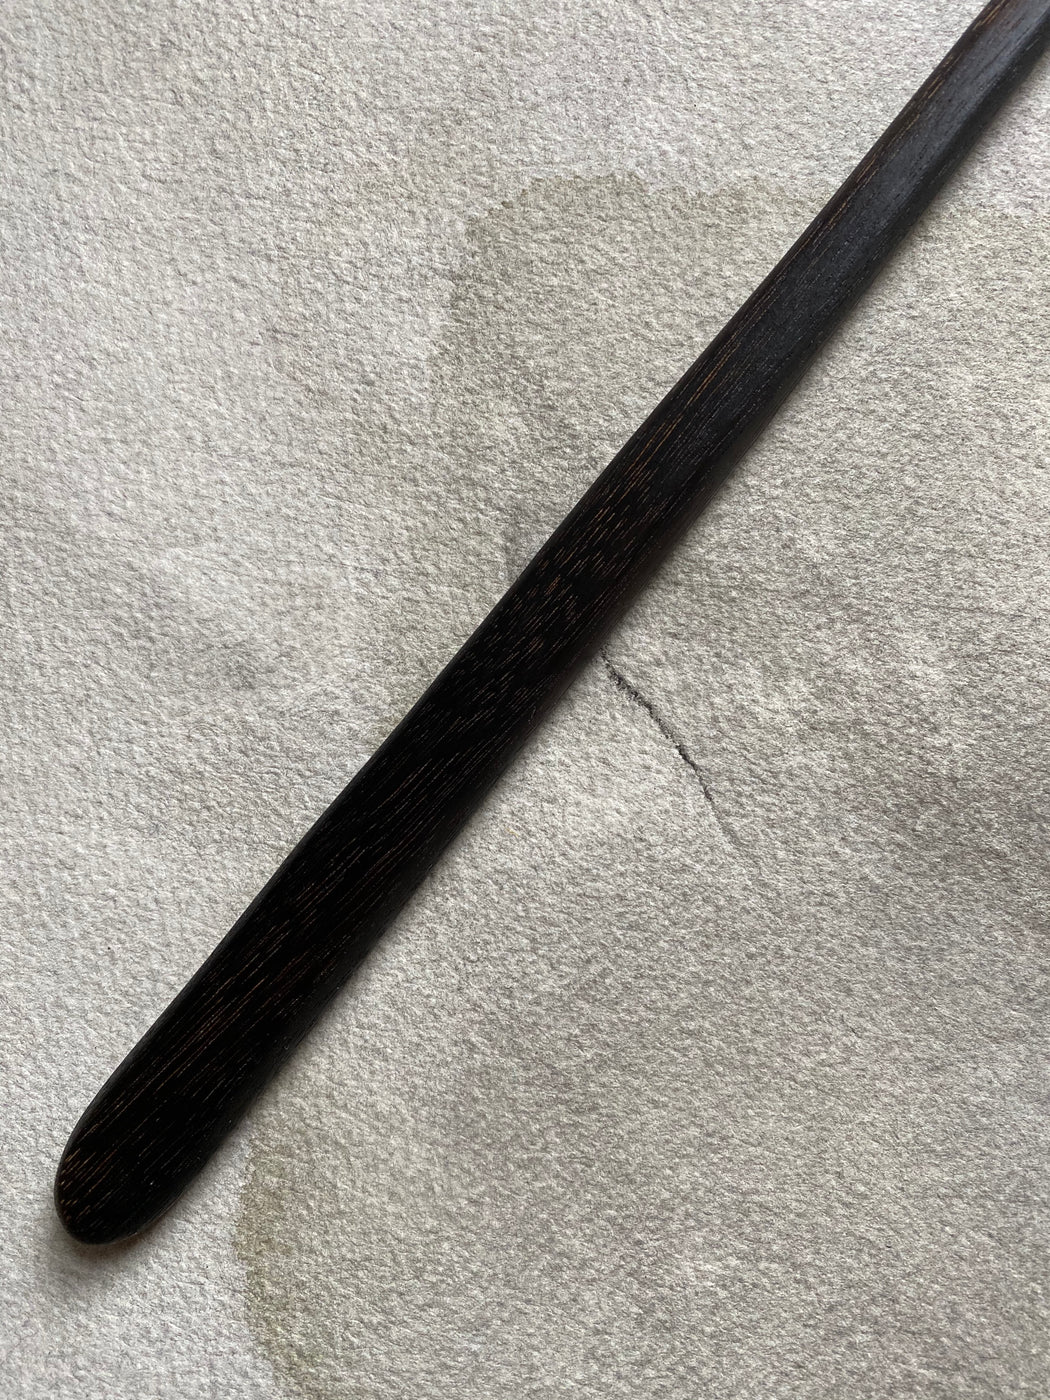 Hand-Carved Stir Spoon - Charred Maple